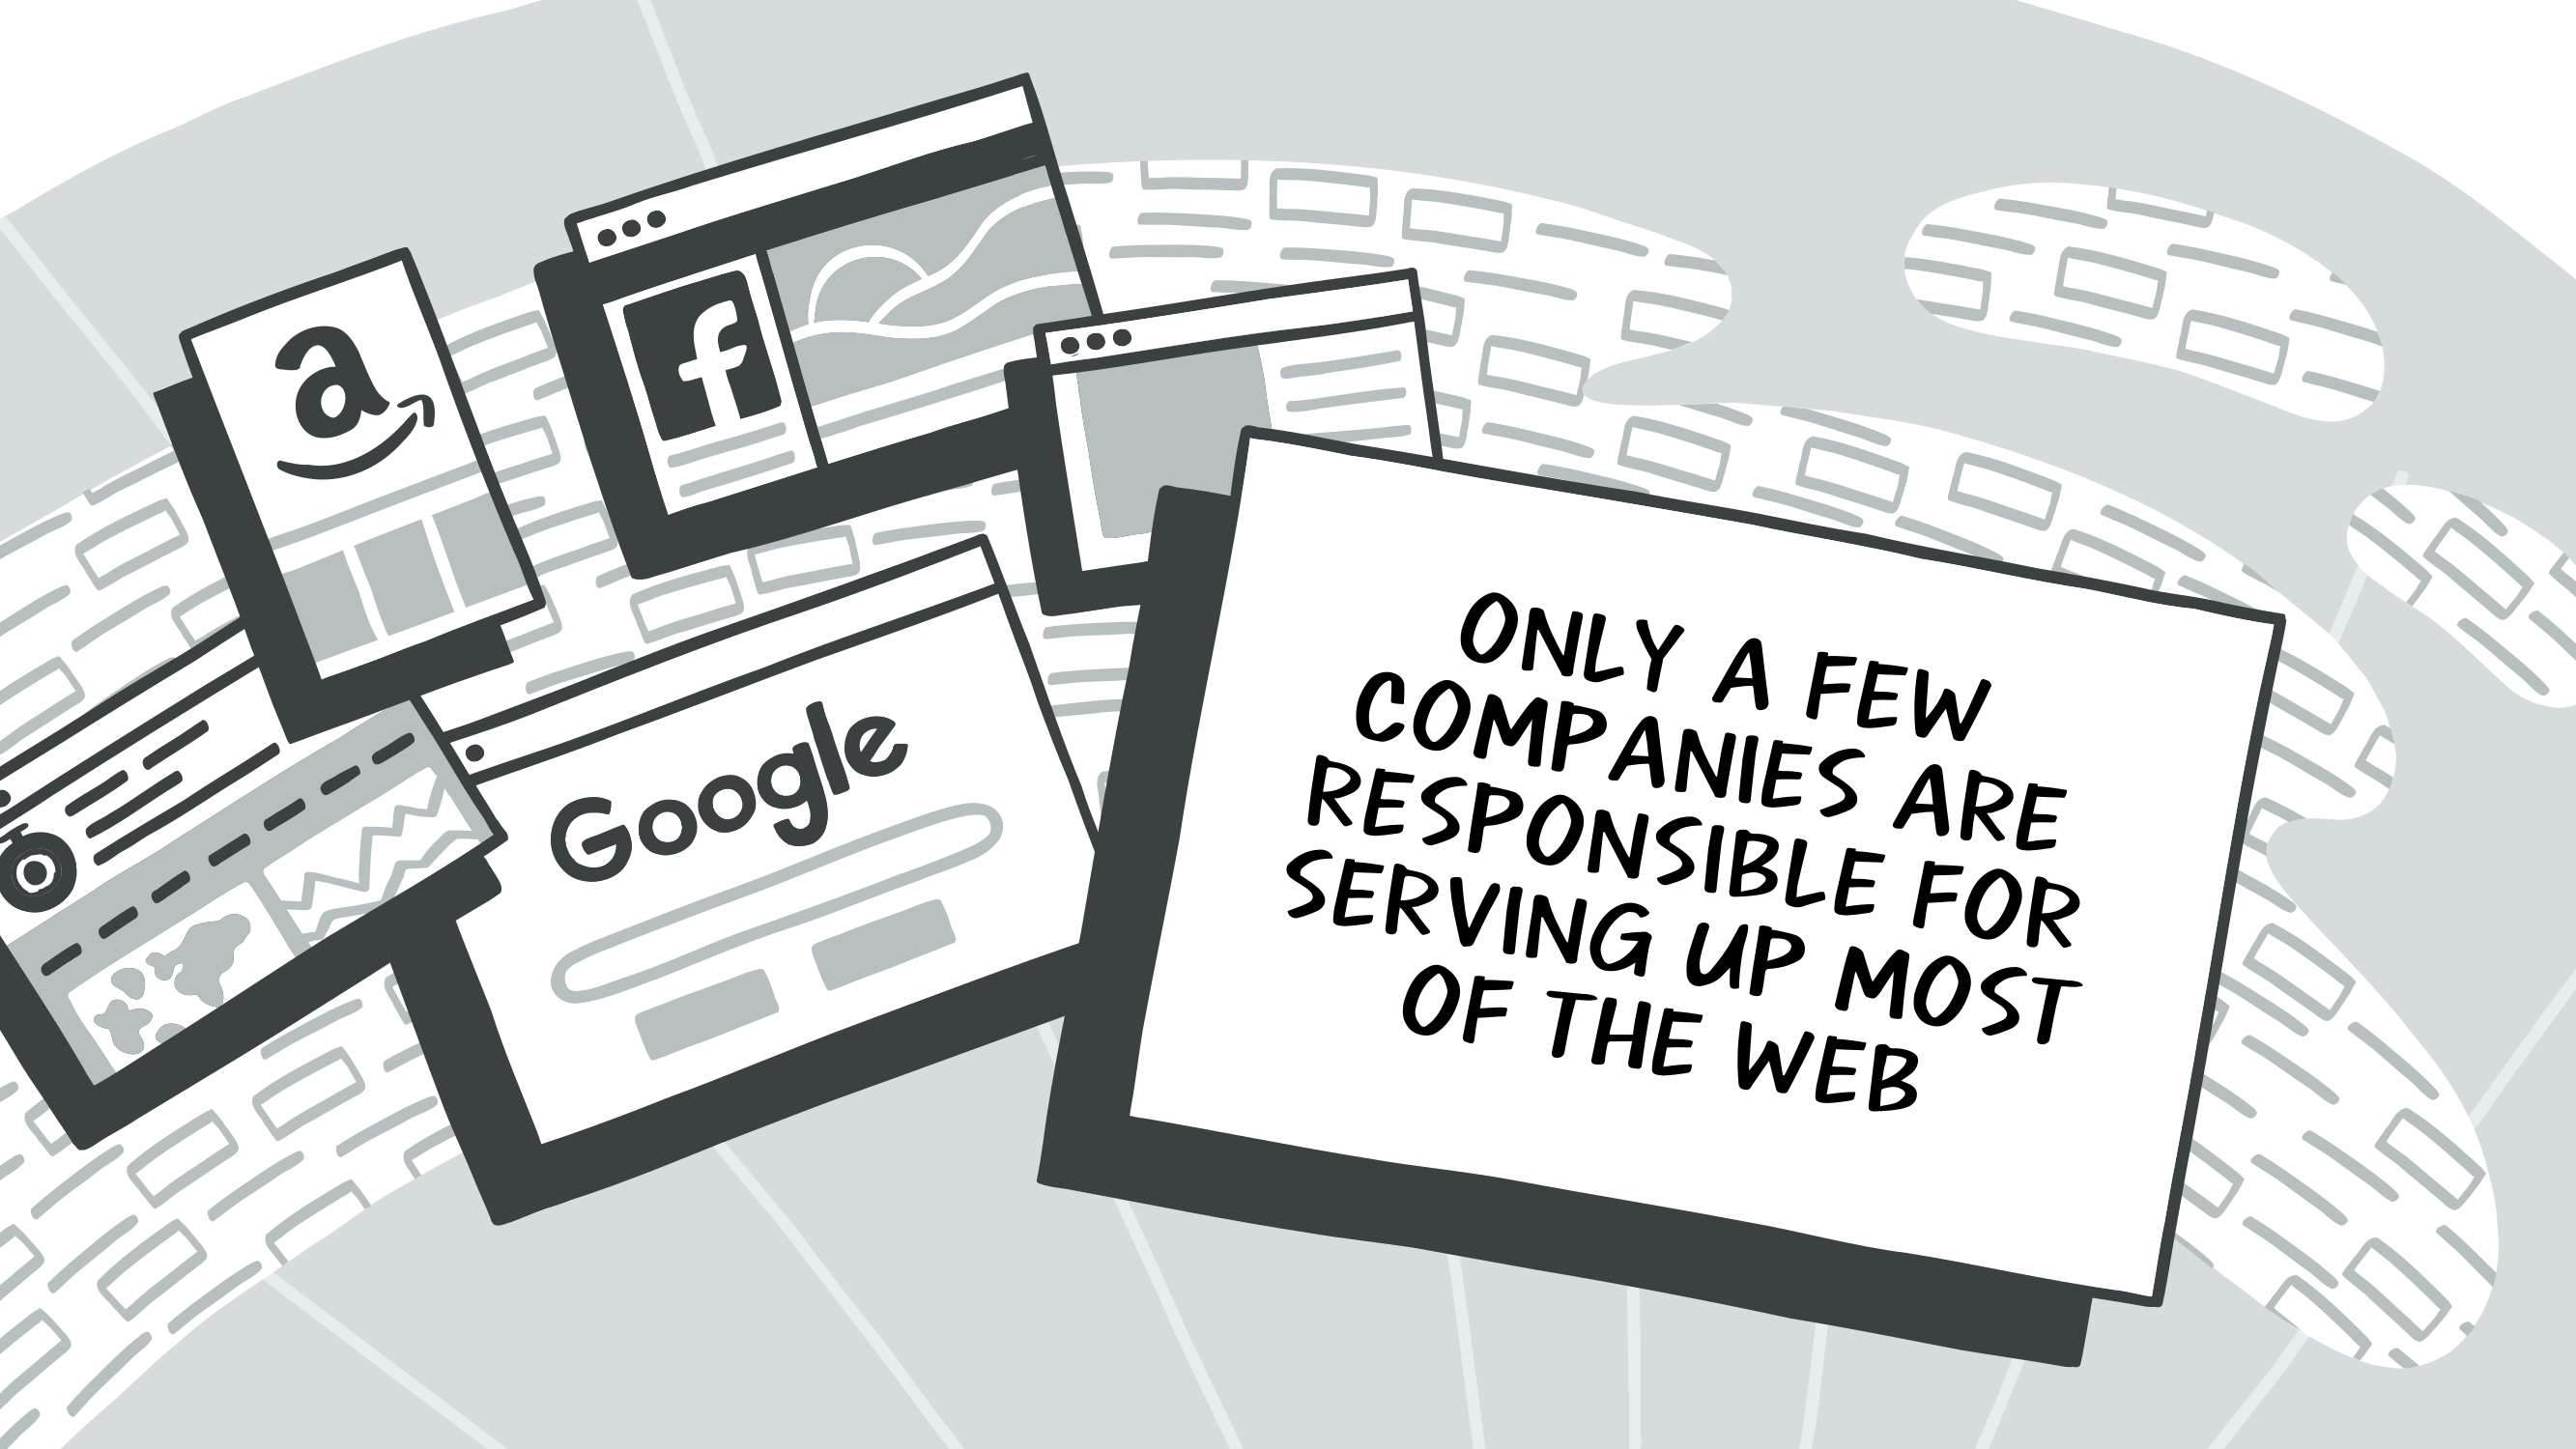 Only a few companies are responsible for serving up most of the web